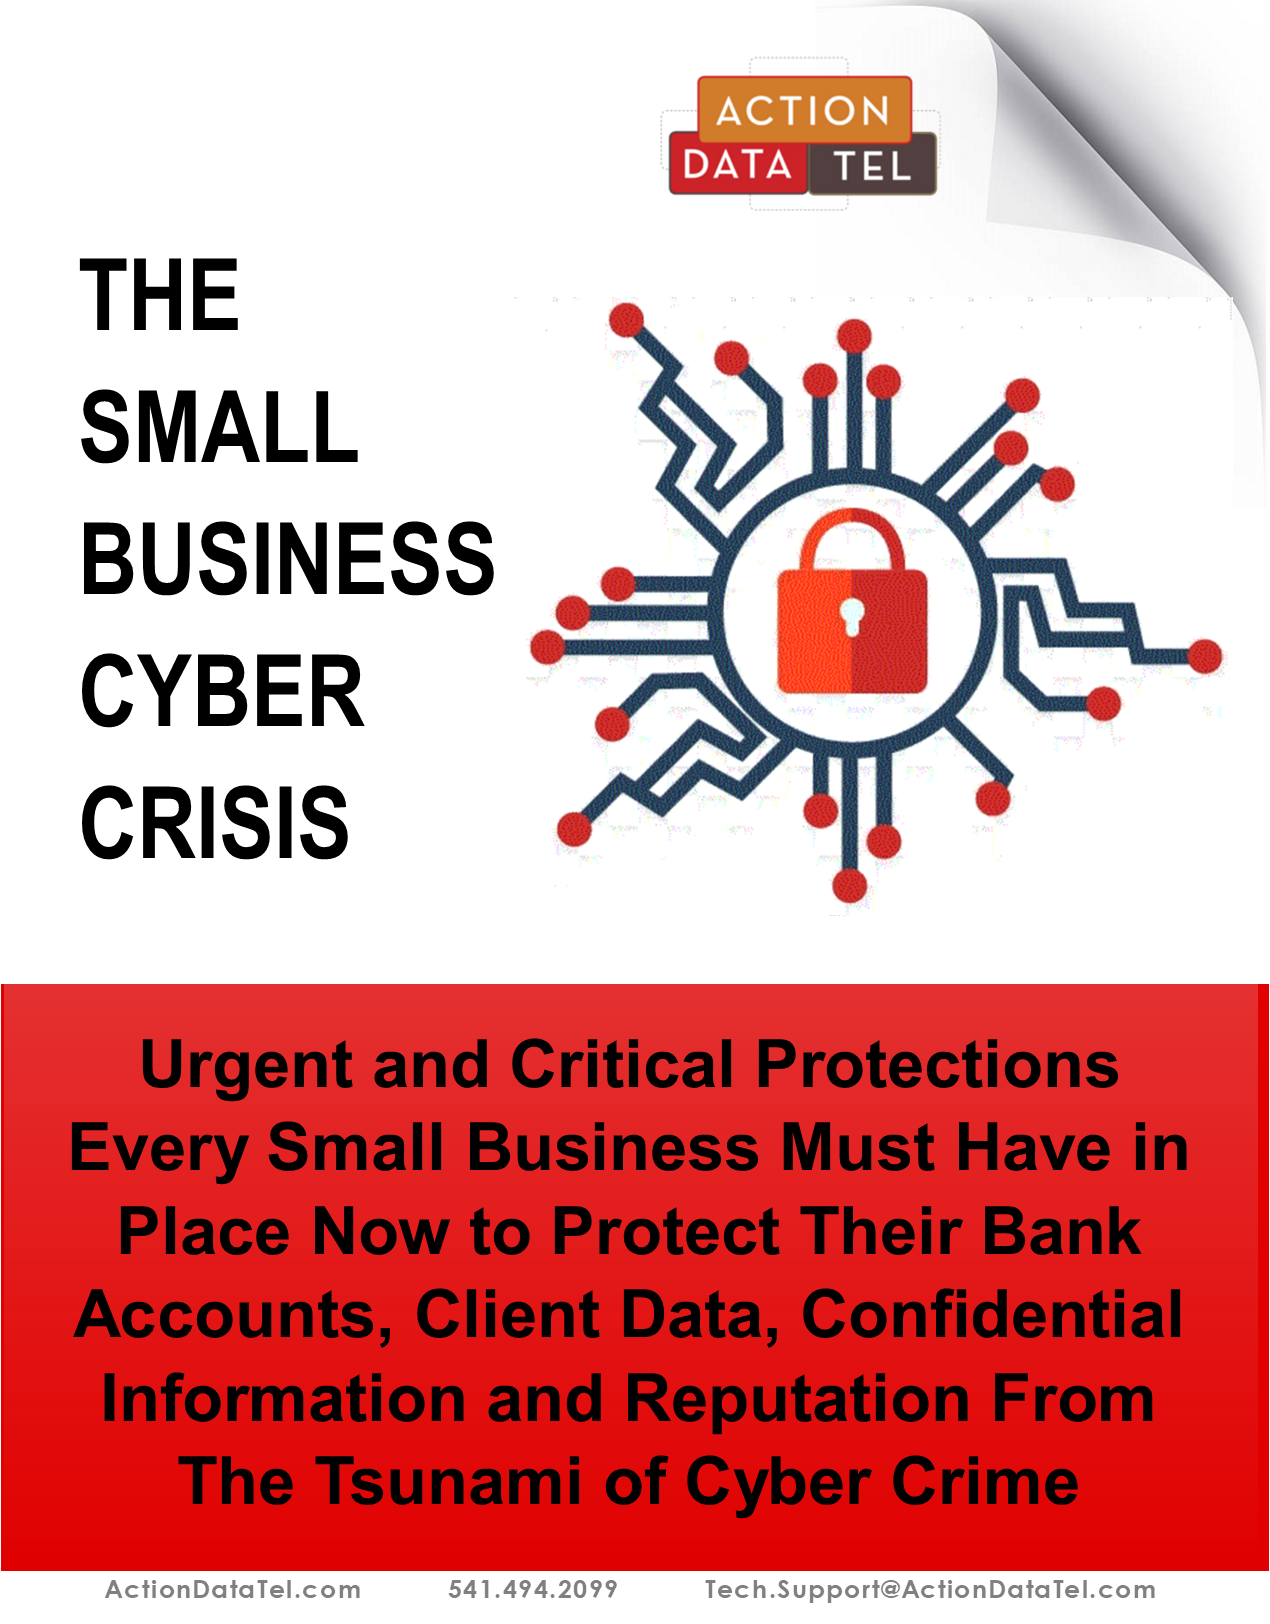 Cyber Crisis-What every business must have in place to protect their bank accounts, client or patient data, and reputation from the tsunami of cyber crime